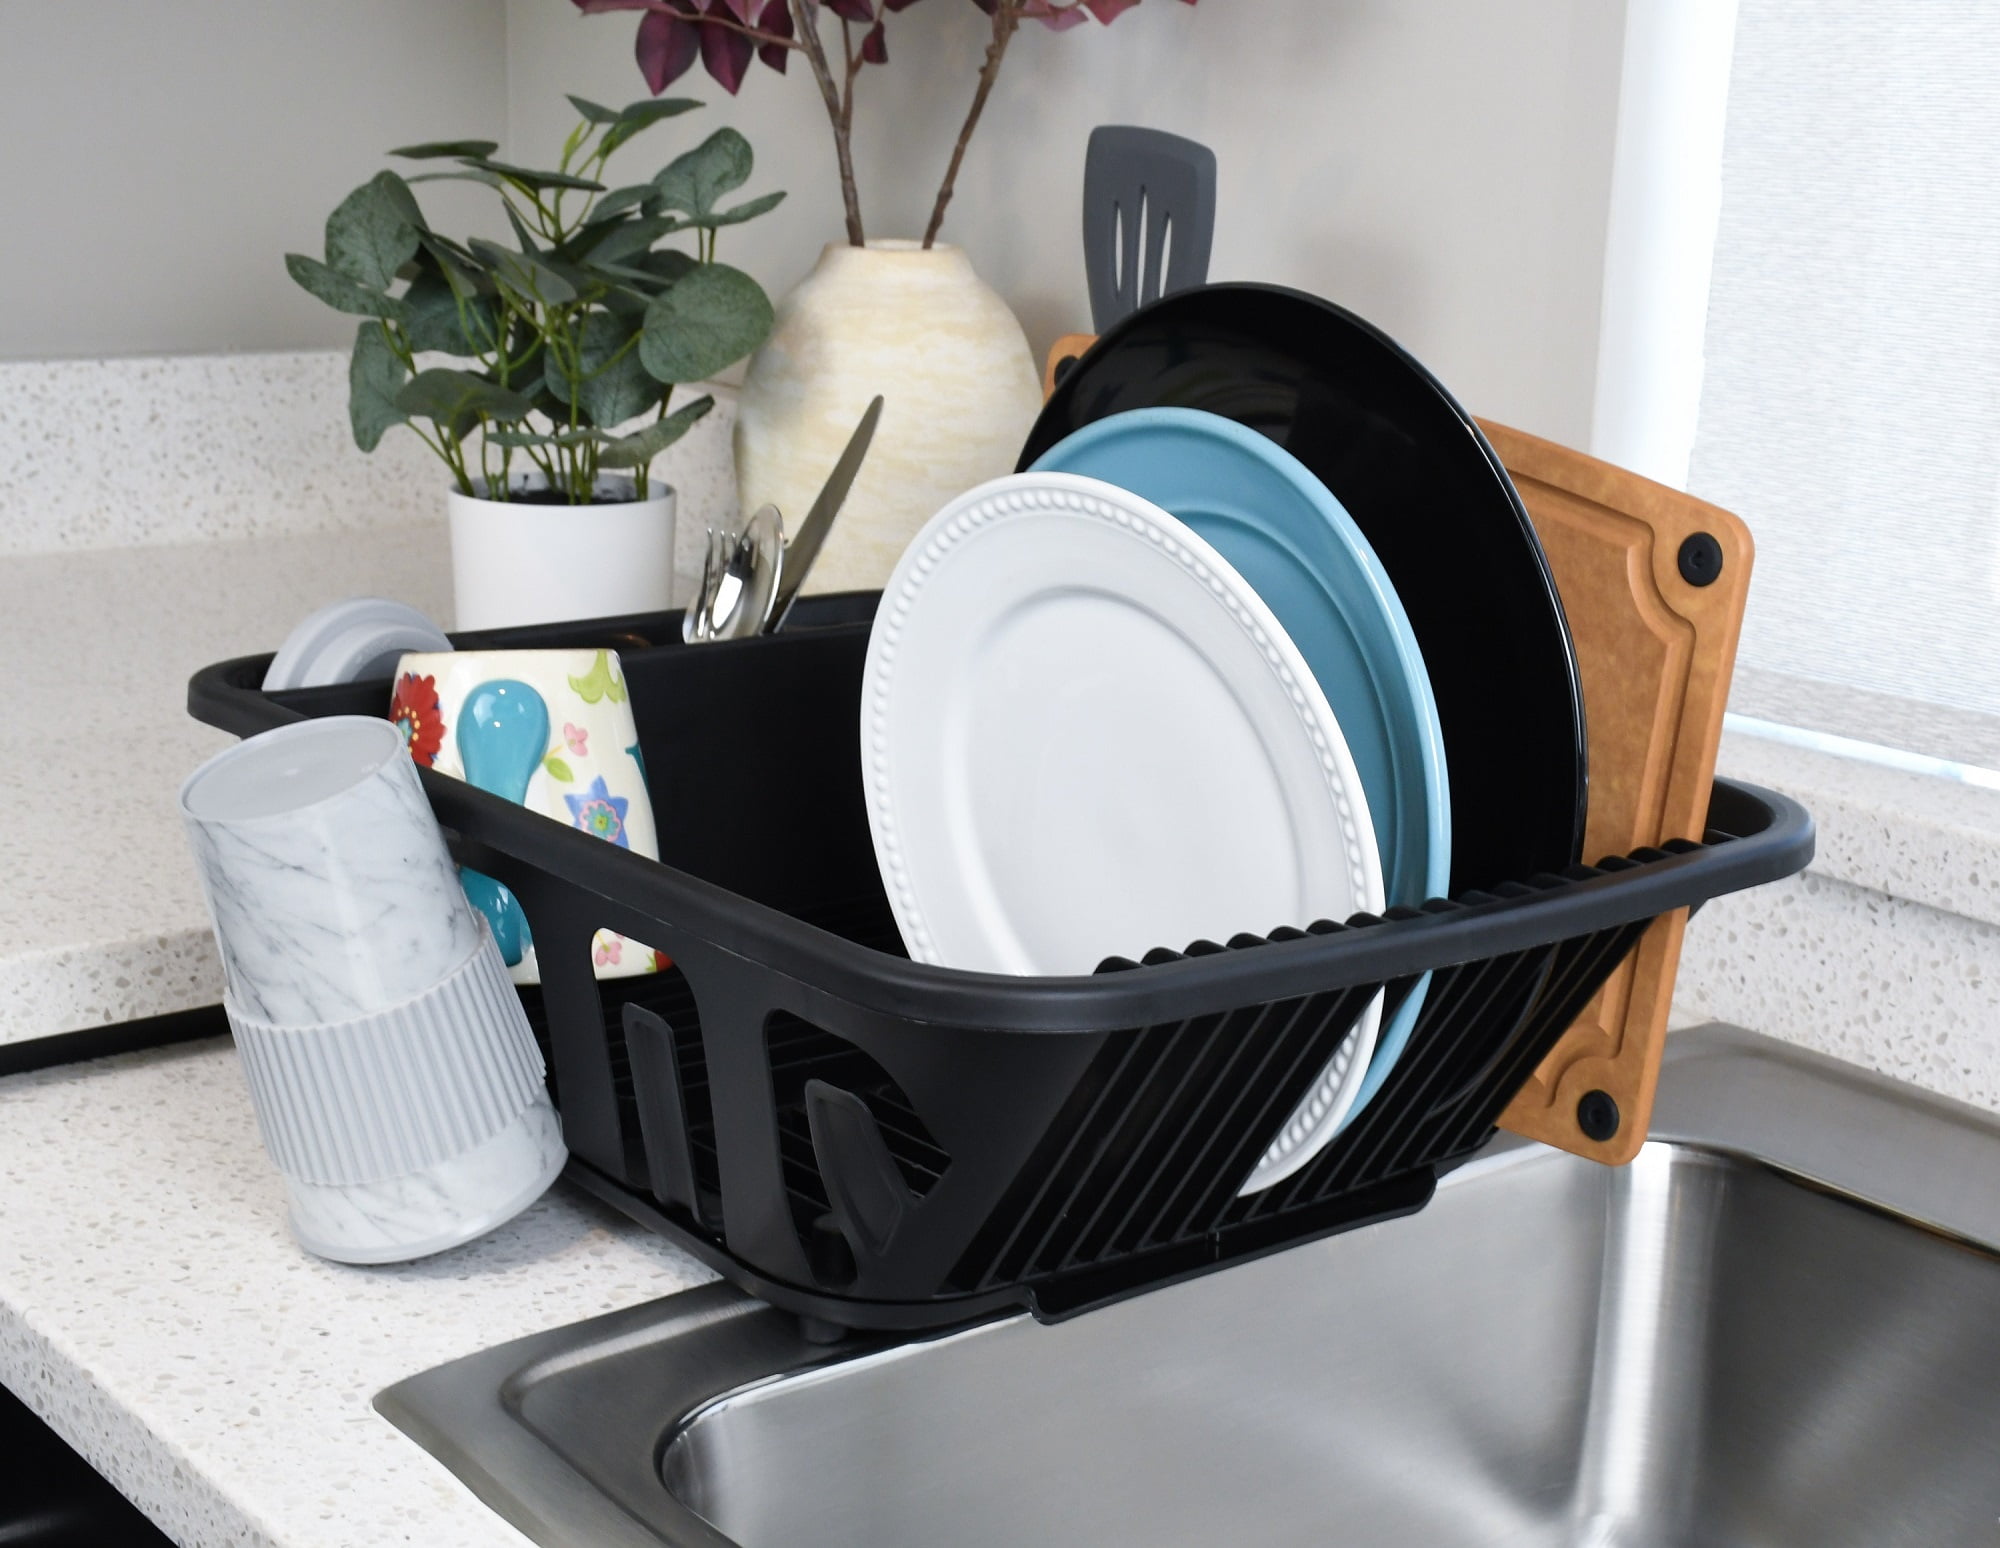 Kitchen Details 11.02-in W x 18.11-in L x 3.54-in H Polypropylene Dish Rack  and Drip Tray in the Dish Racks & Trays department at